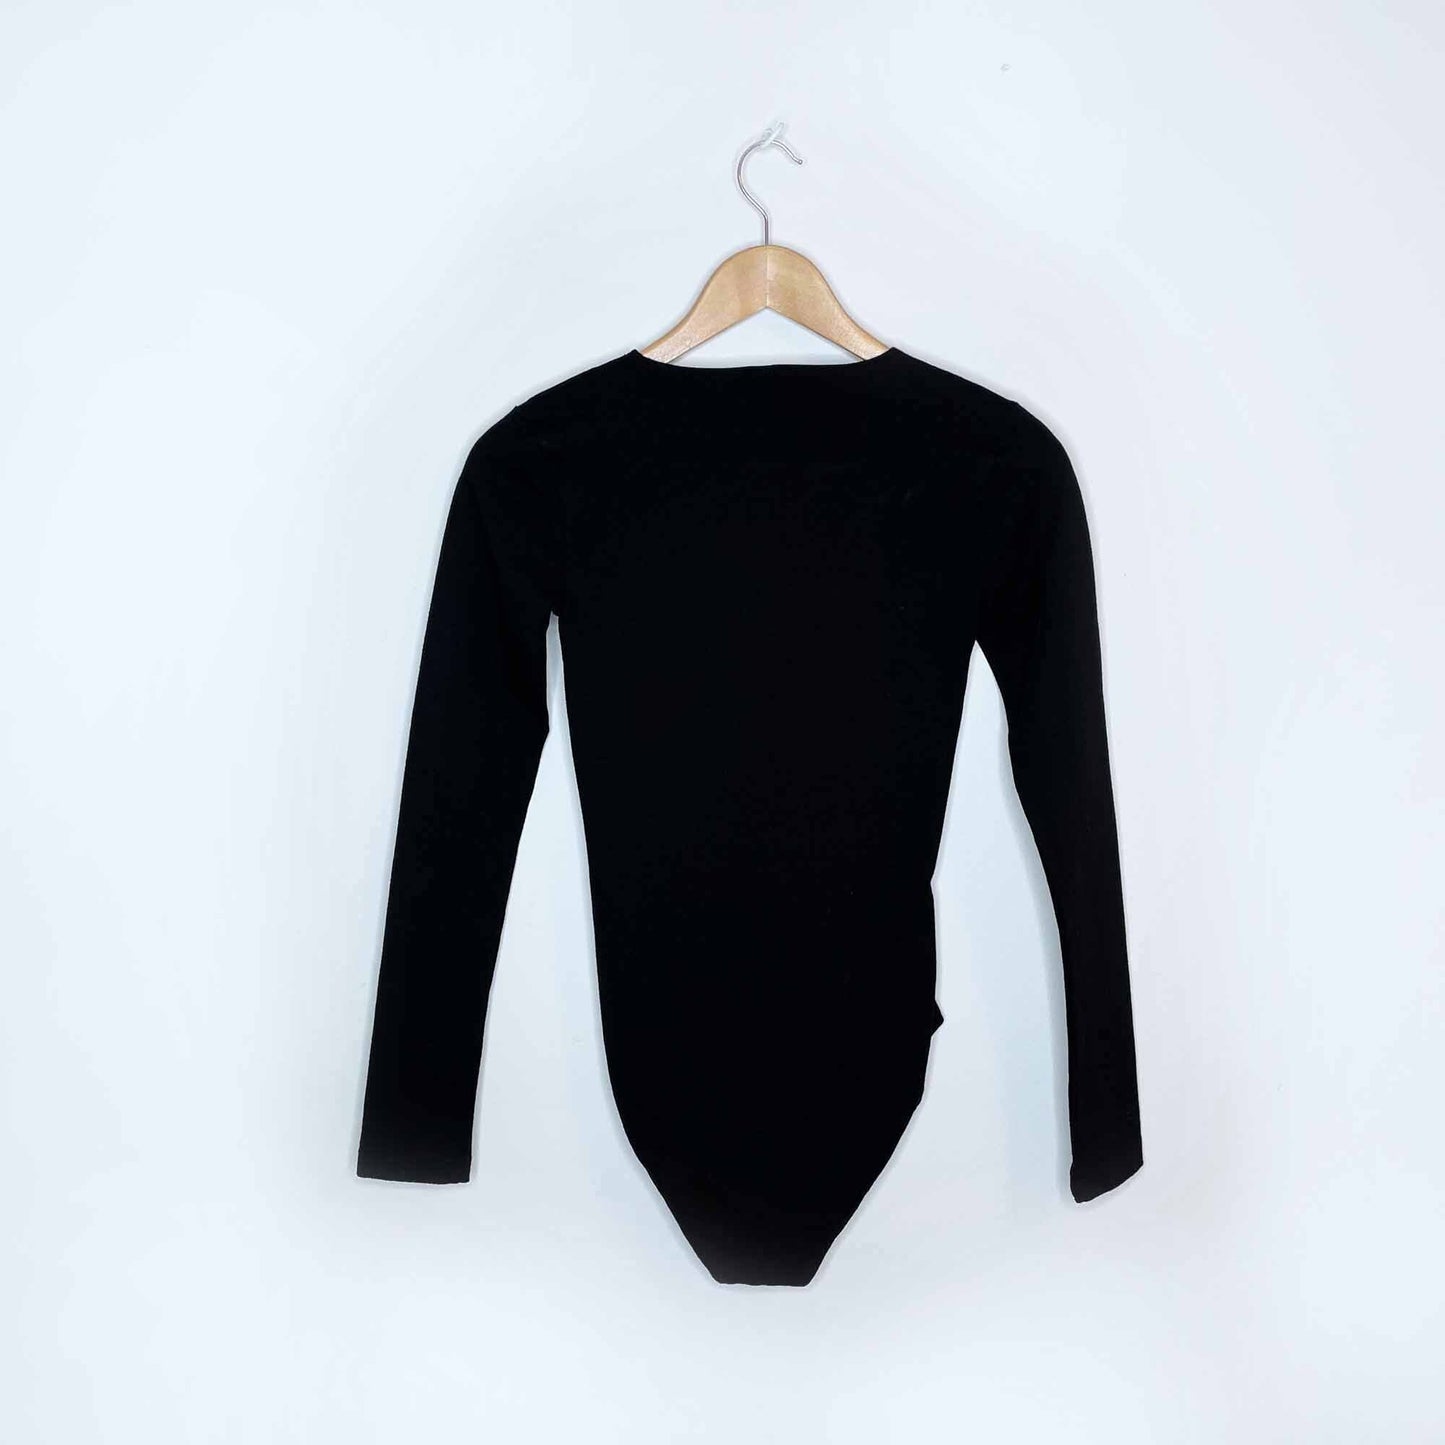 American Apparel cotton jersey long sleeve bodysuit - size Small